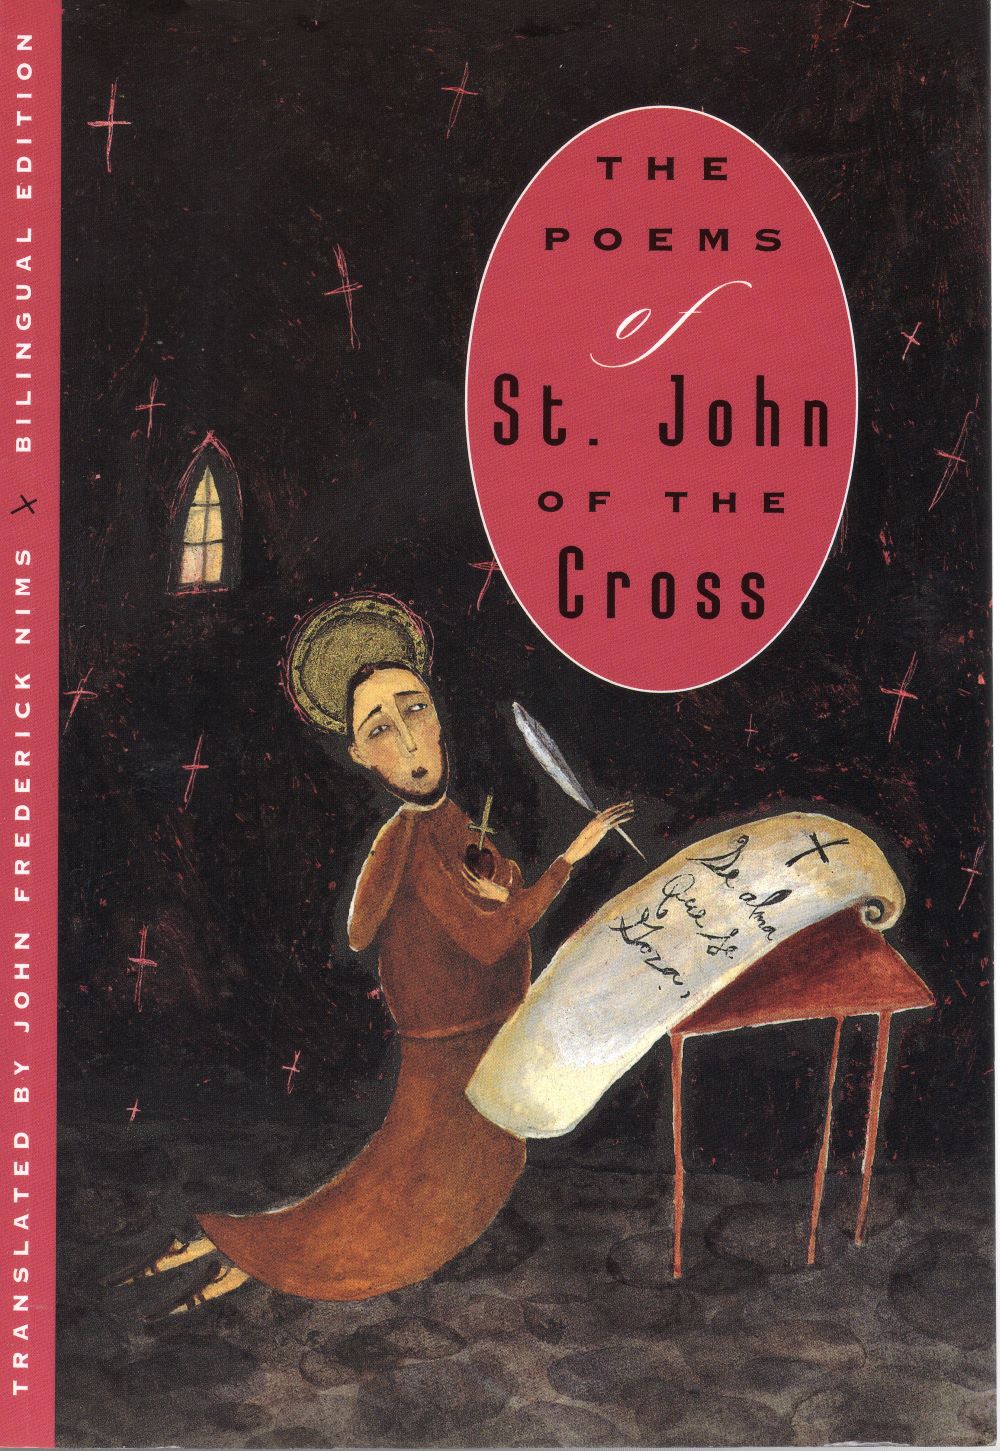 THE POEMS OF ST JOHN OF THE CROSS (bilingual edition)